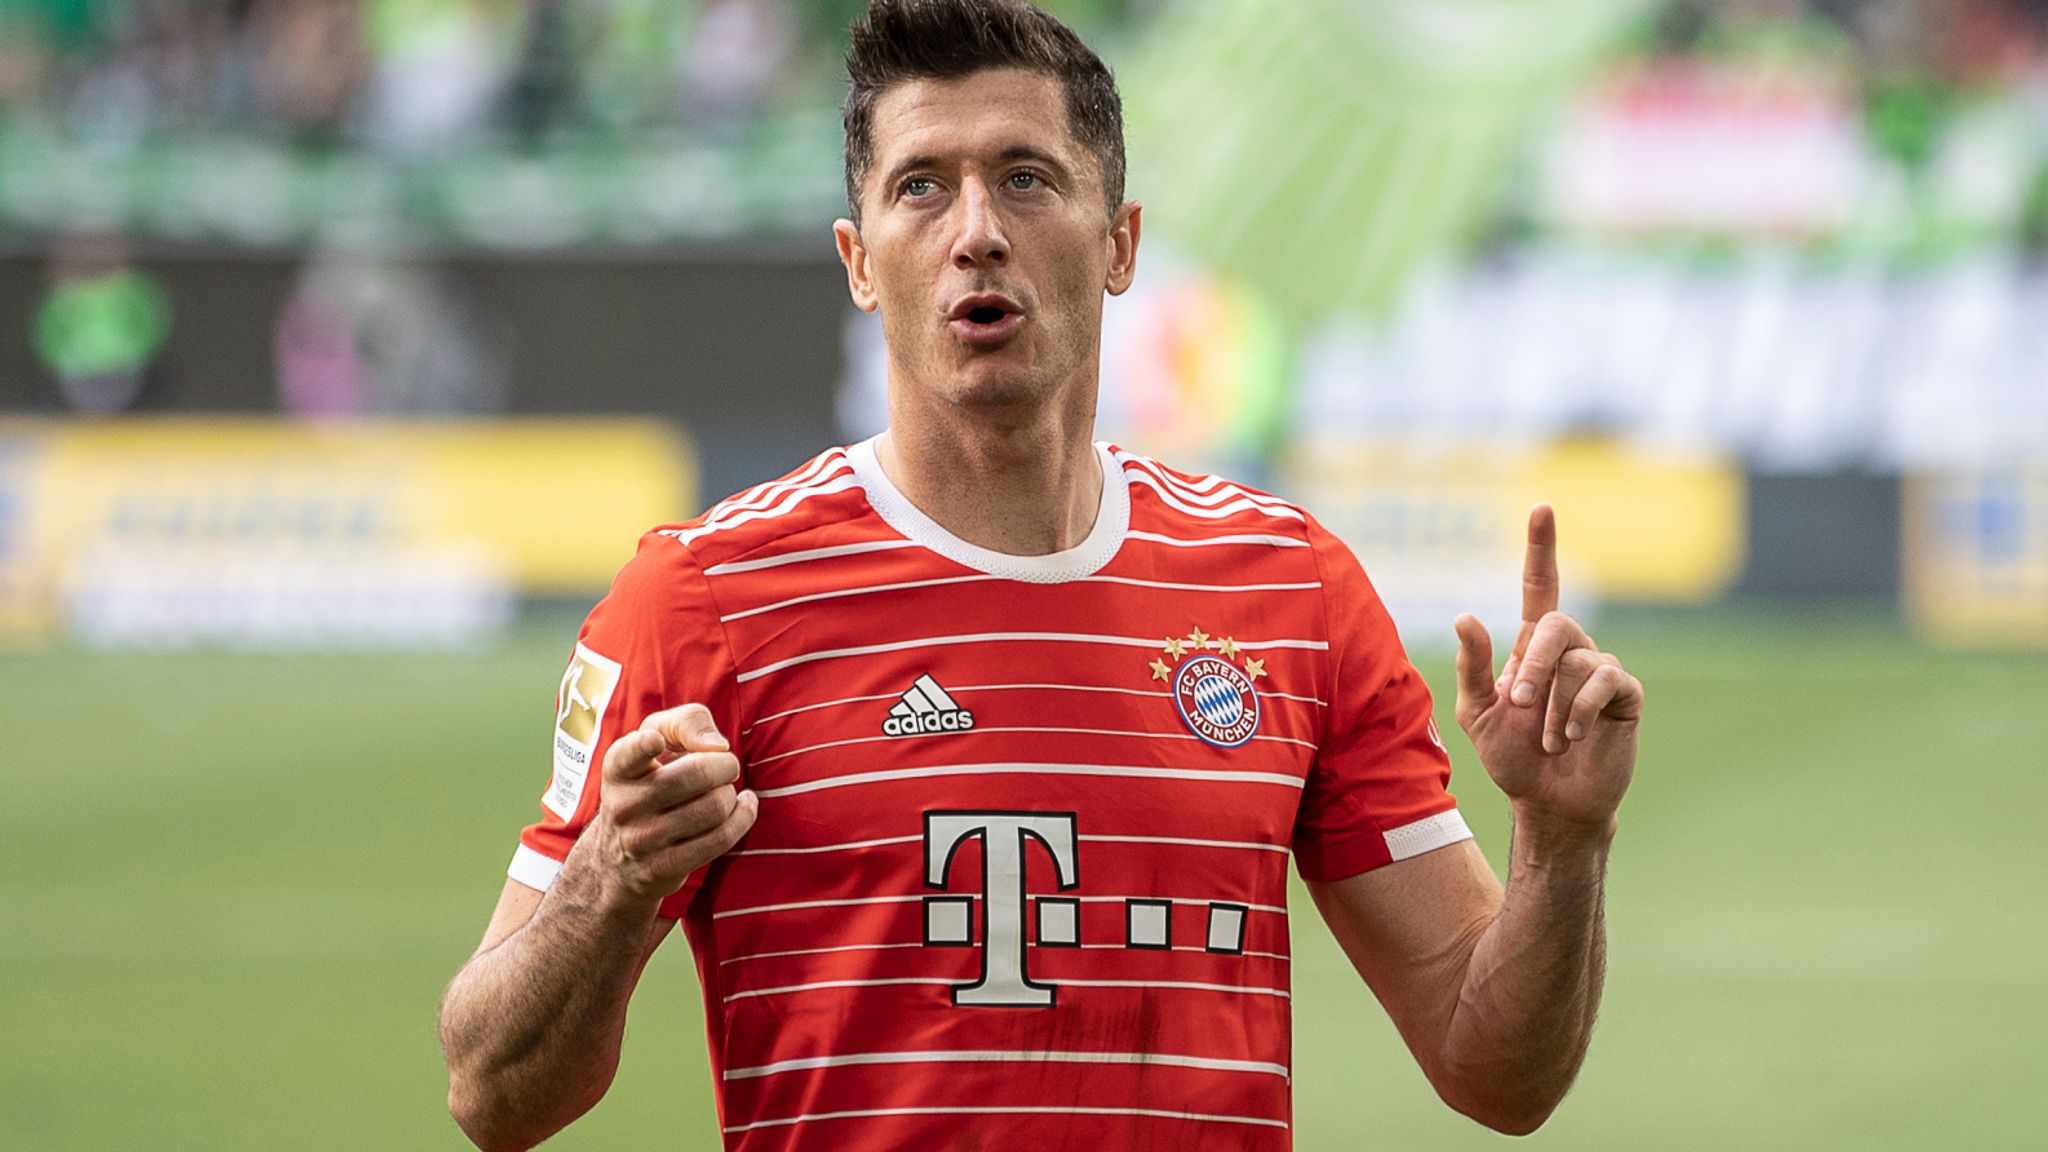 Do you think Robert Lewandowski will be considered an all time